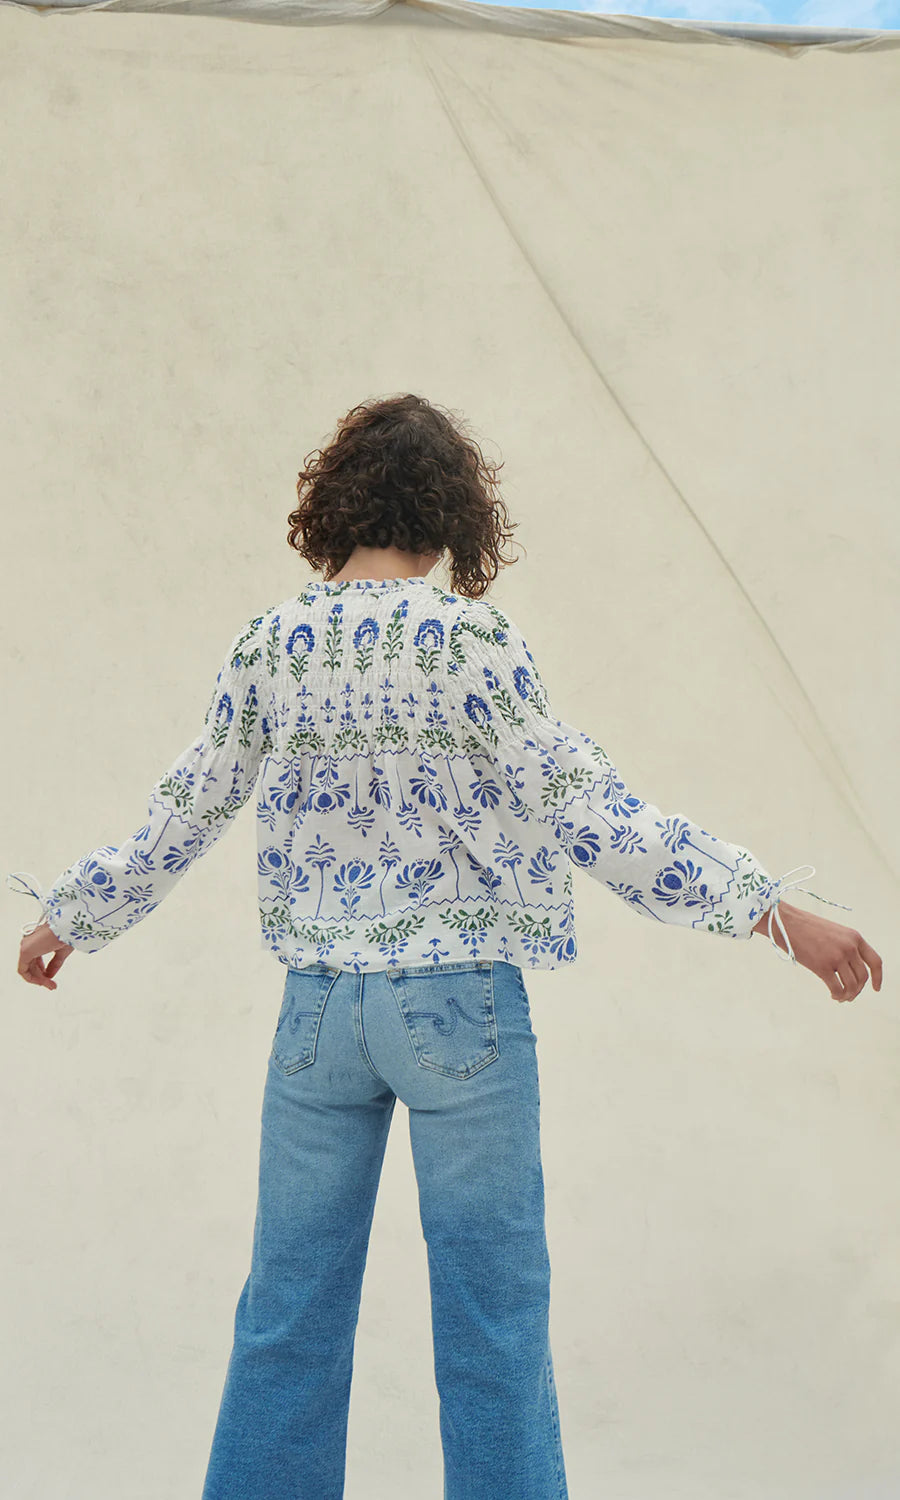 Orlagh Floral Print Top by Saylor available at waterlilyshop